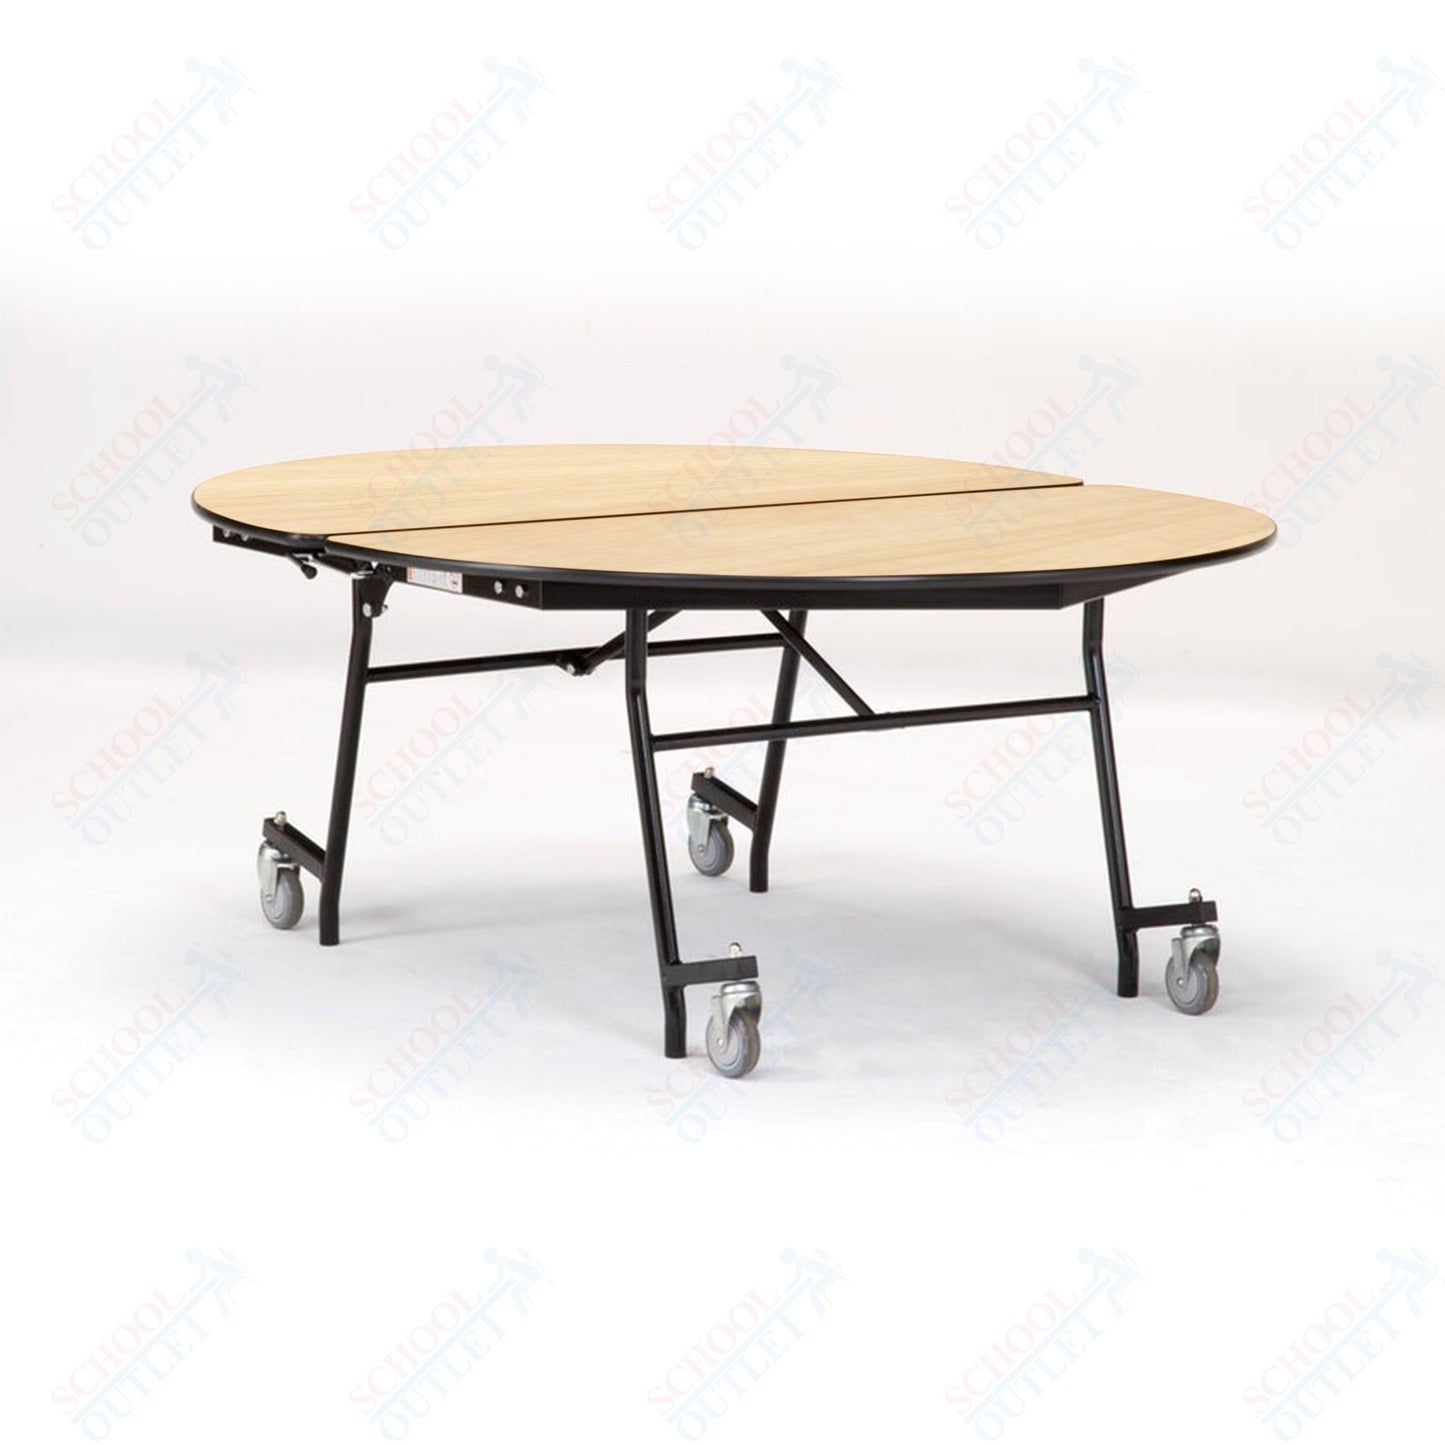 NPS Mobile Cafeteria Oval Table Shape Unit - 72" L x 60" W (National Public Seating NPS-MT72V)